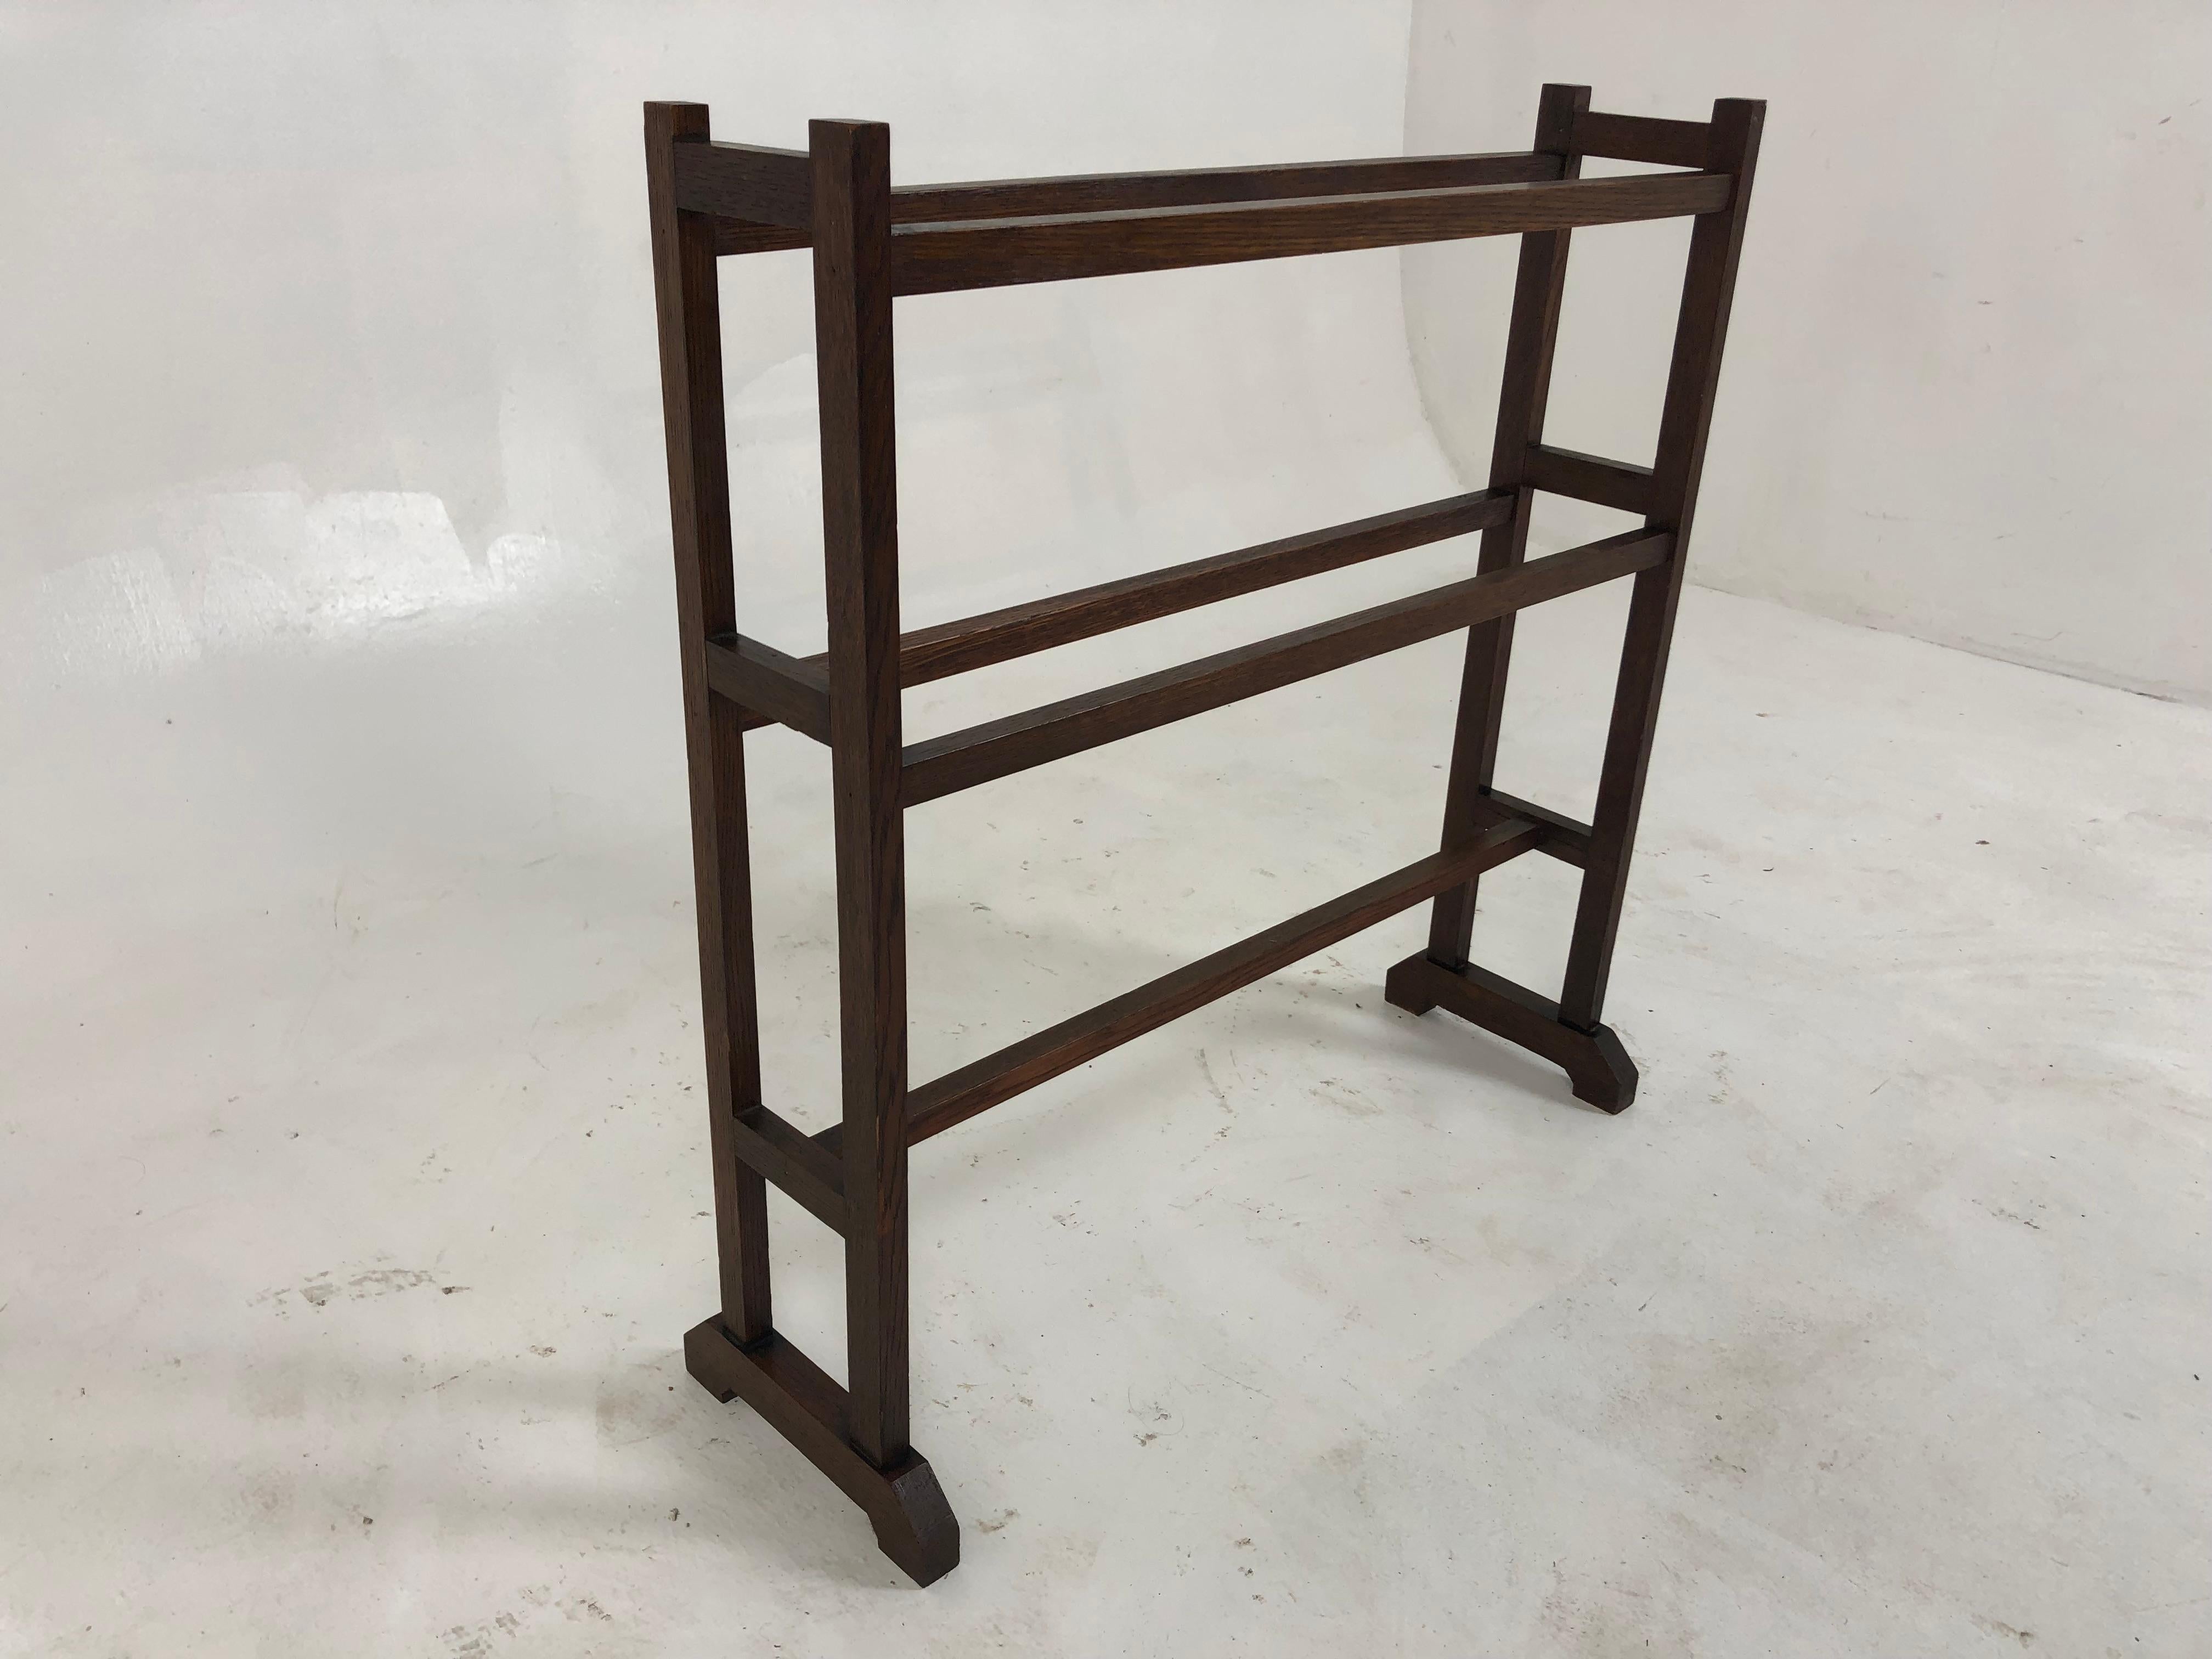 Antique Victorian oak towel Rail, Linen Rack, Scotland 1890, H840

Scotland 1890
Solid Walnut
Original Finish
Double rails on top
Single rail underneath
Supported by solid oak rails on the ends
Nice quality and in good